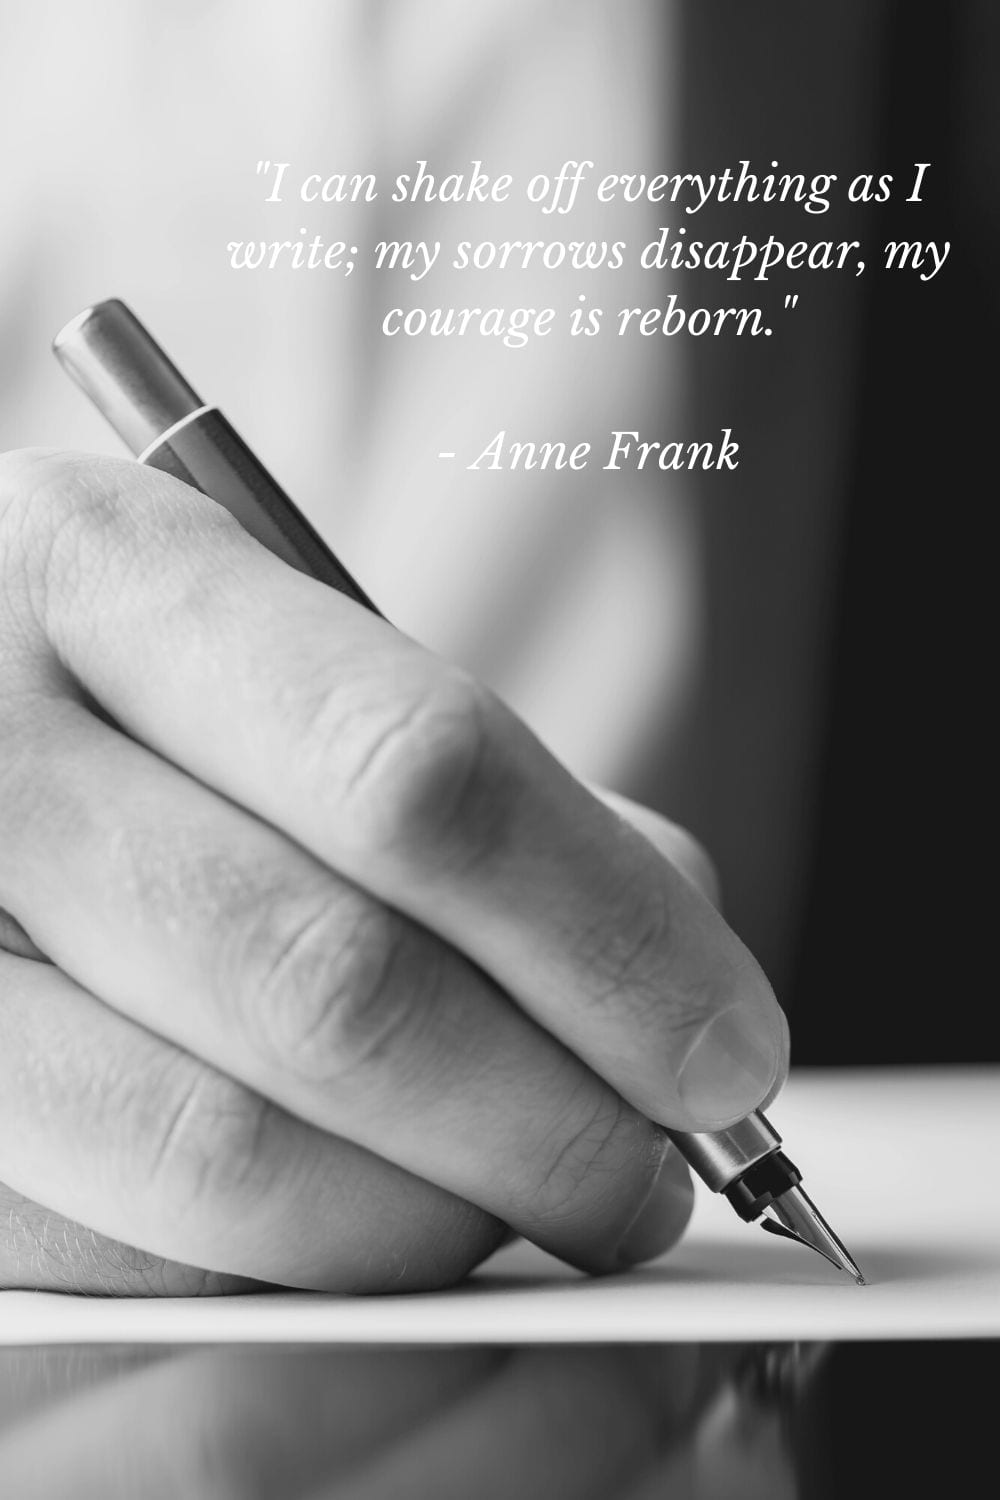 Anne Frank quote about courage